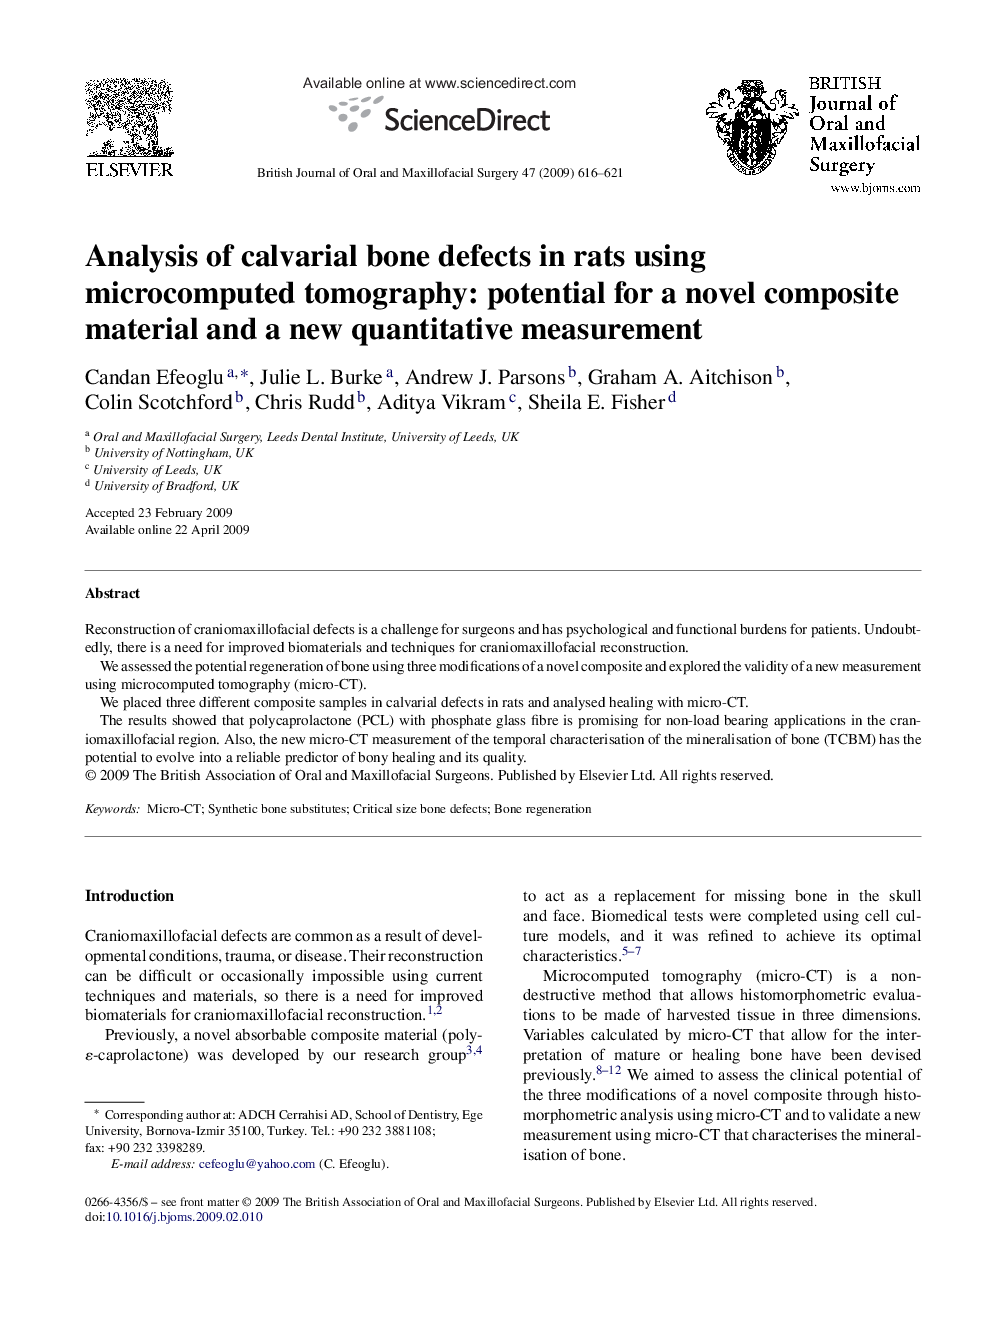 Analysis of calvarial bone defects in rats using microcomputed tomography: potential for a novel composite material and a new quantitative measurement